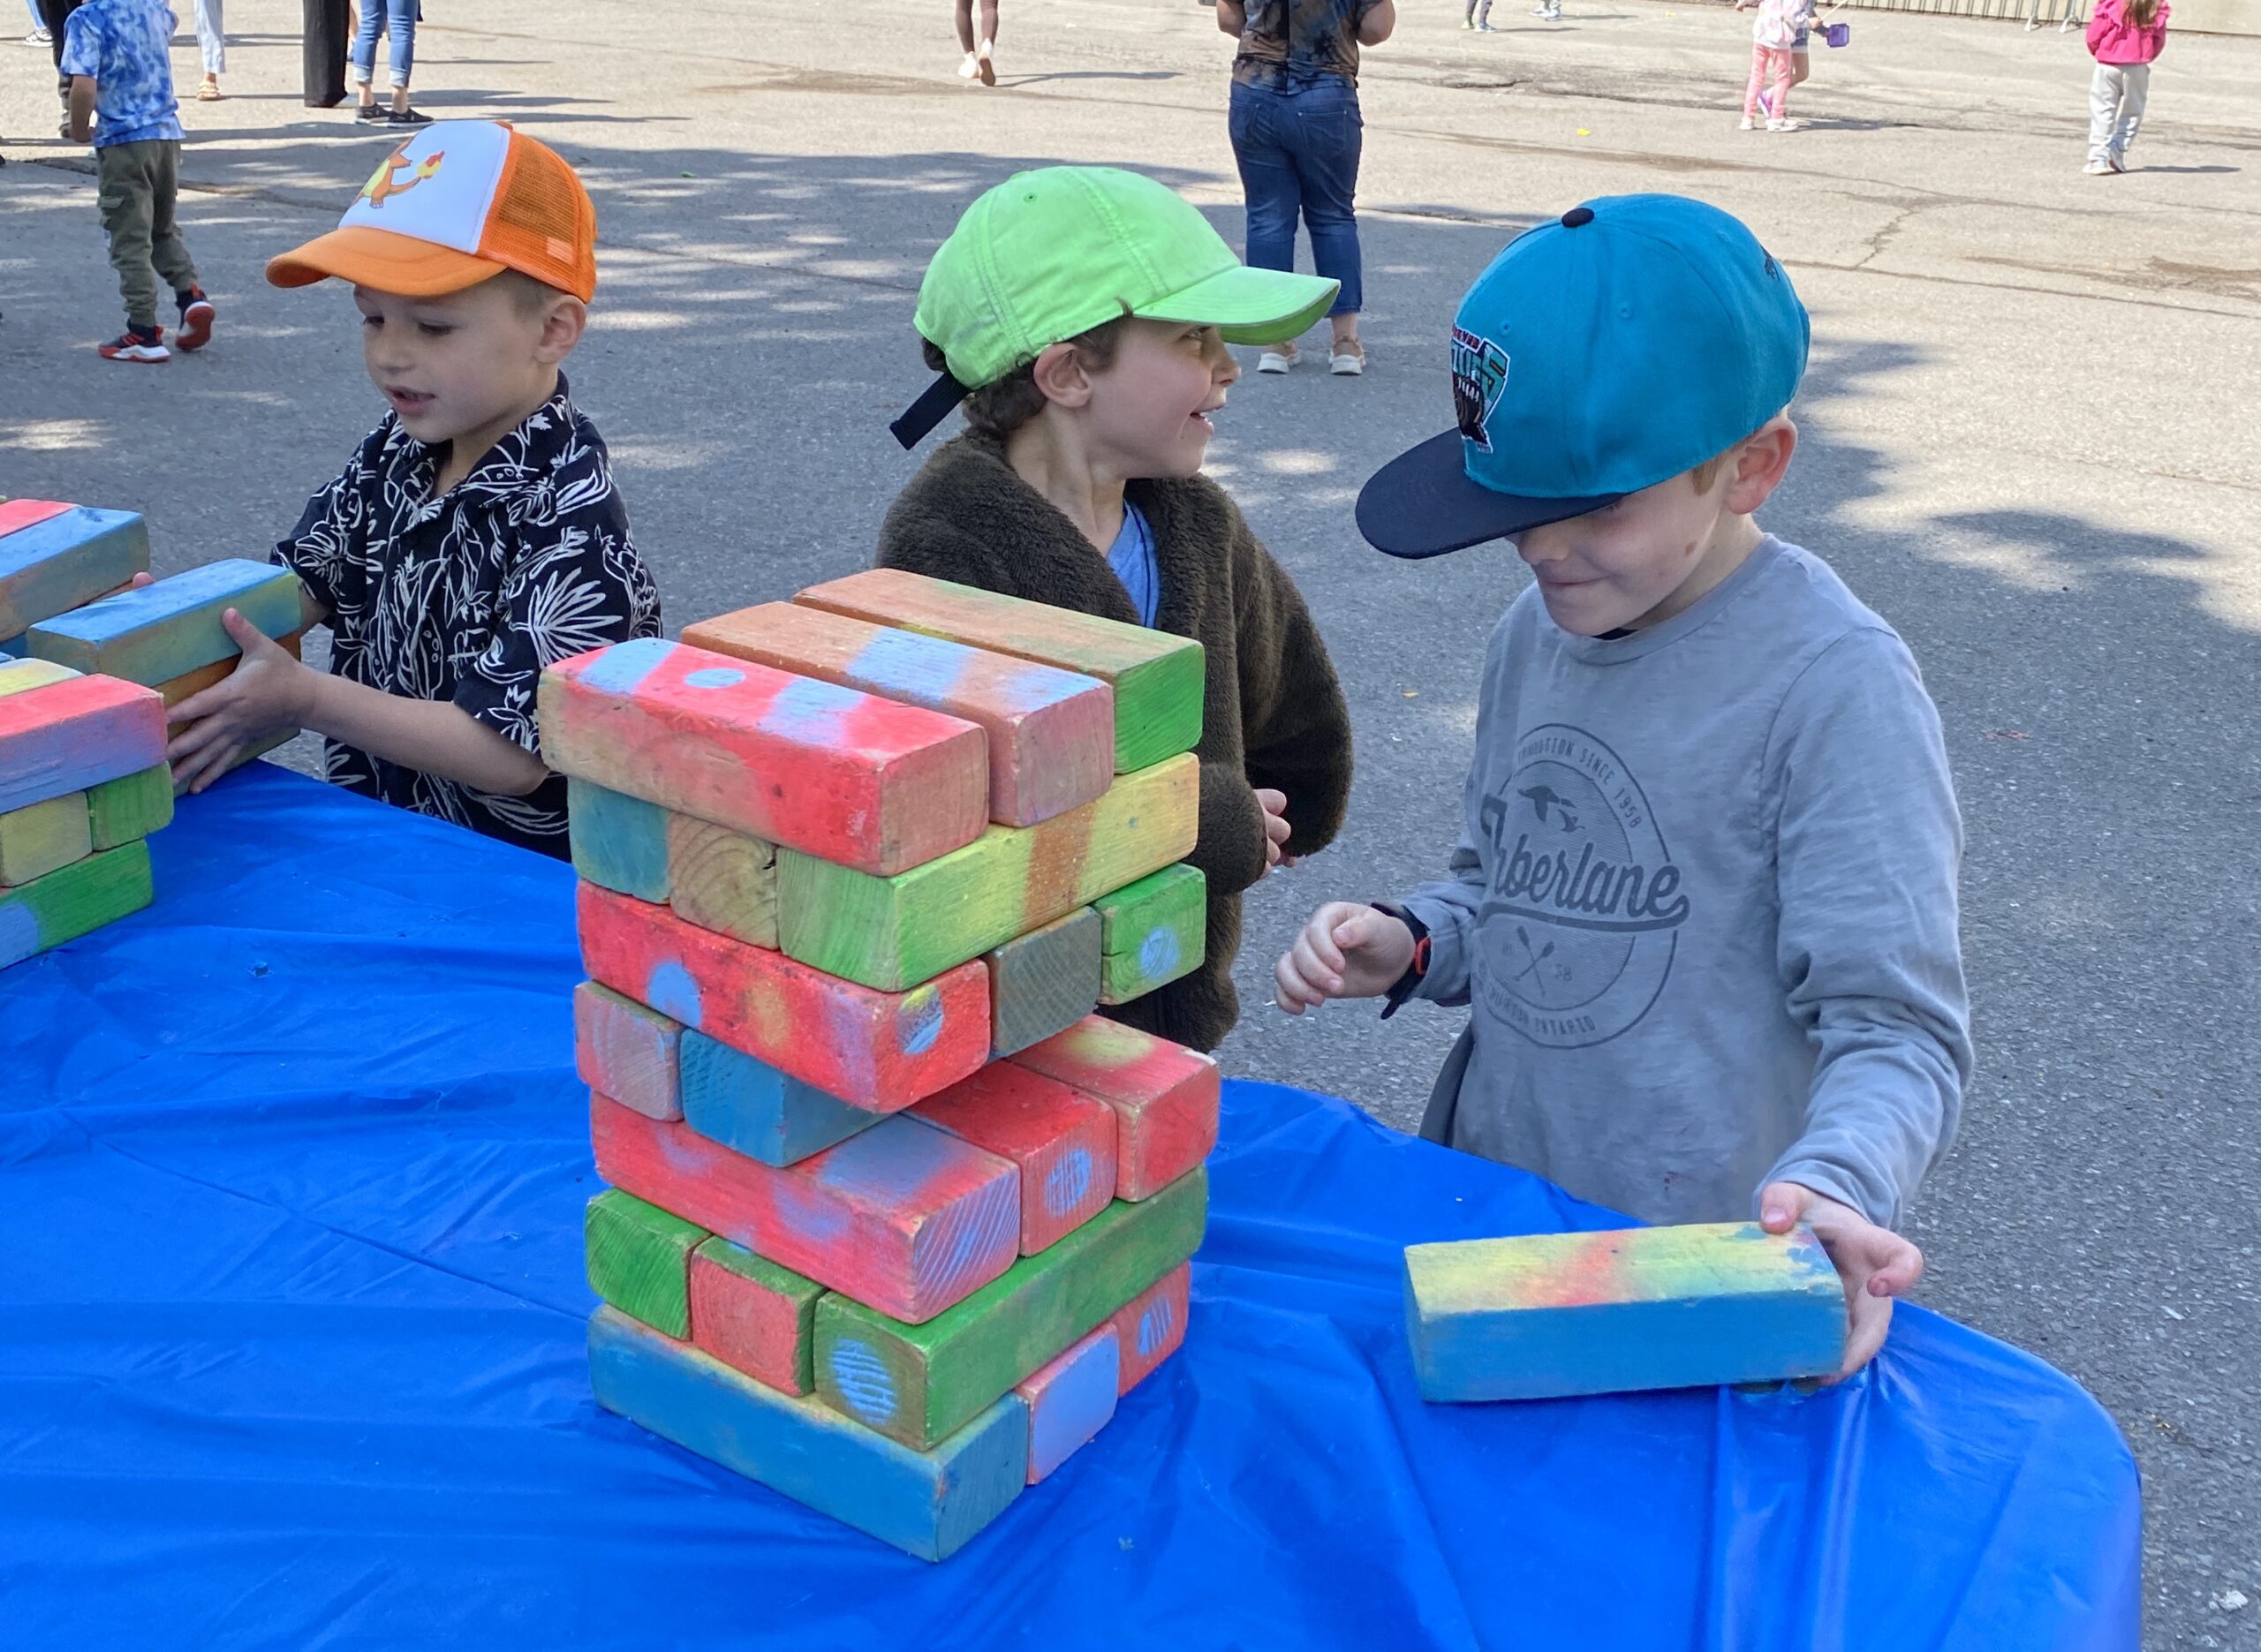 Three children playing outdoors on a tarmac with a Jenga-style game set up on a table. The wooden blocks are spray painted and one boy is taking his turn.